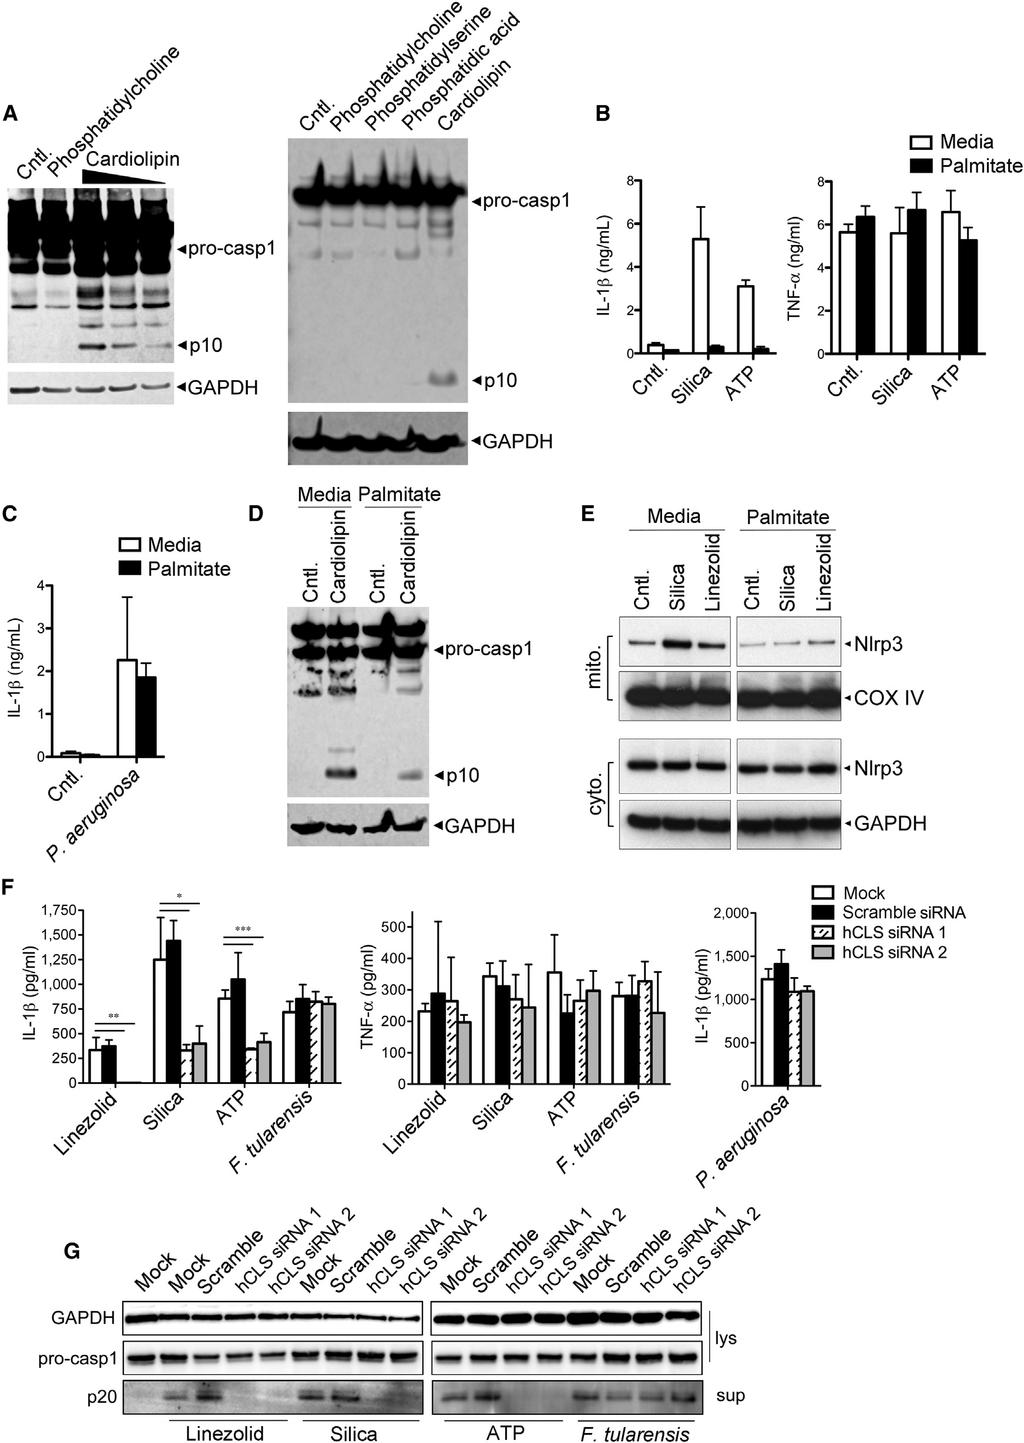 Figure 6. Cardiolipin Is Required and Sufficient for Nlrp3 Inflammasome Activation (A) LPS-primed J774A.